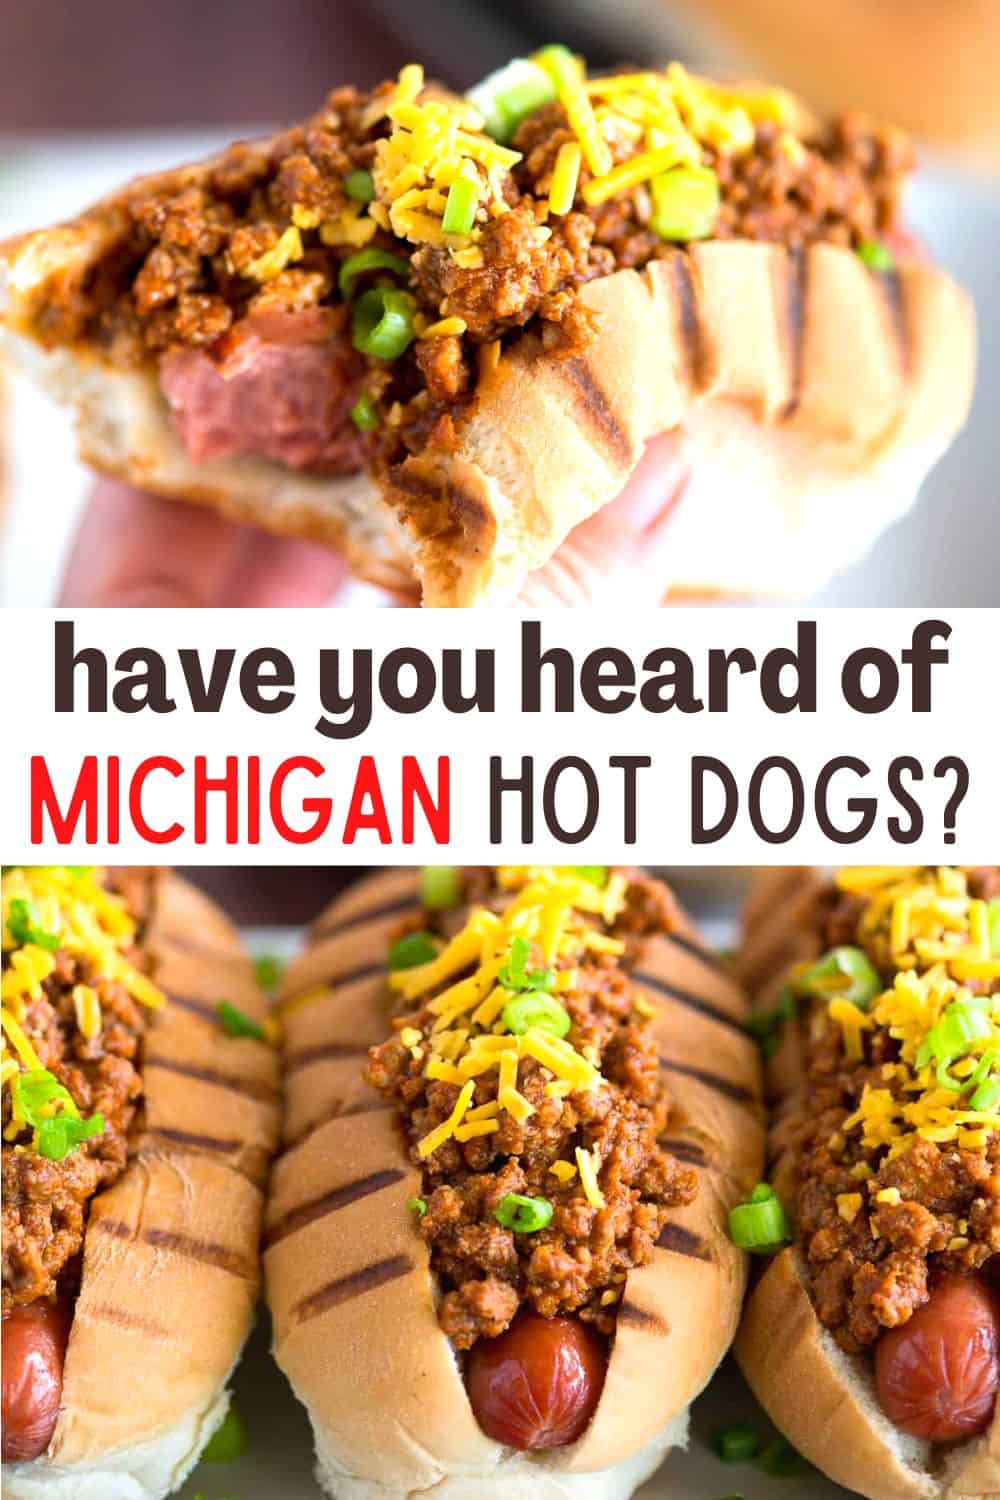 This easy michigan sauce recipe is a vinegar based meat sauce that slathers over top your hot dogs. Similar to a coney dog, upstate new york calls them michigans. (And, yes, its a lowercase 'm'!)